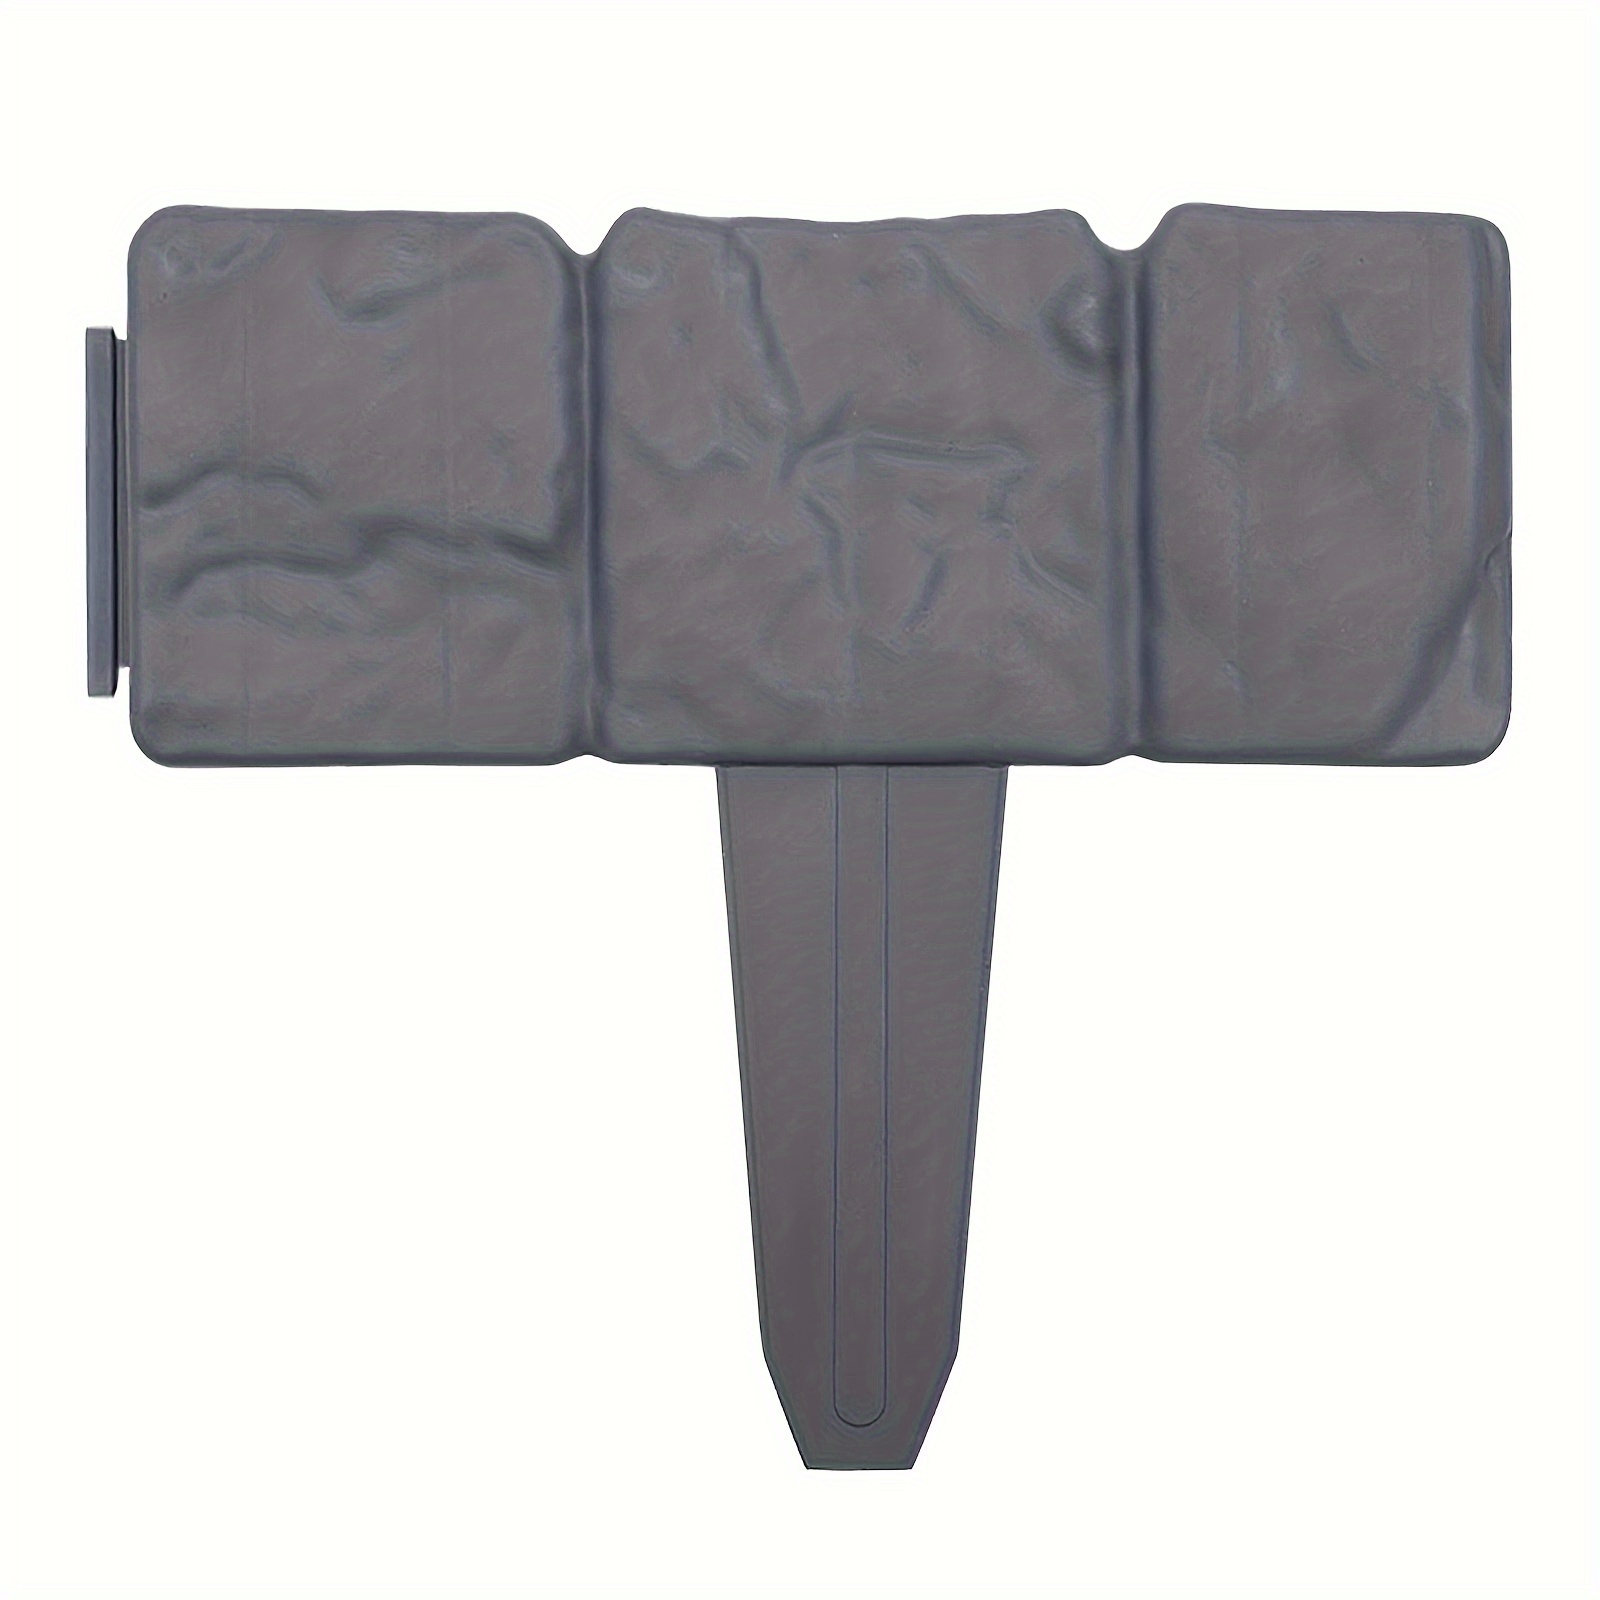 

Trmlbe Plastic Lawn Edging T-form Edging With Ground Inserts And Fixing Clasps Flexible Cut Bar Garden Fence, Anthracite